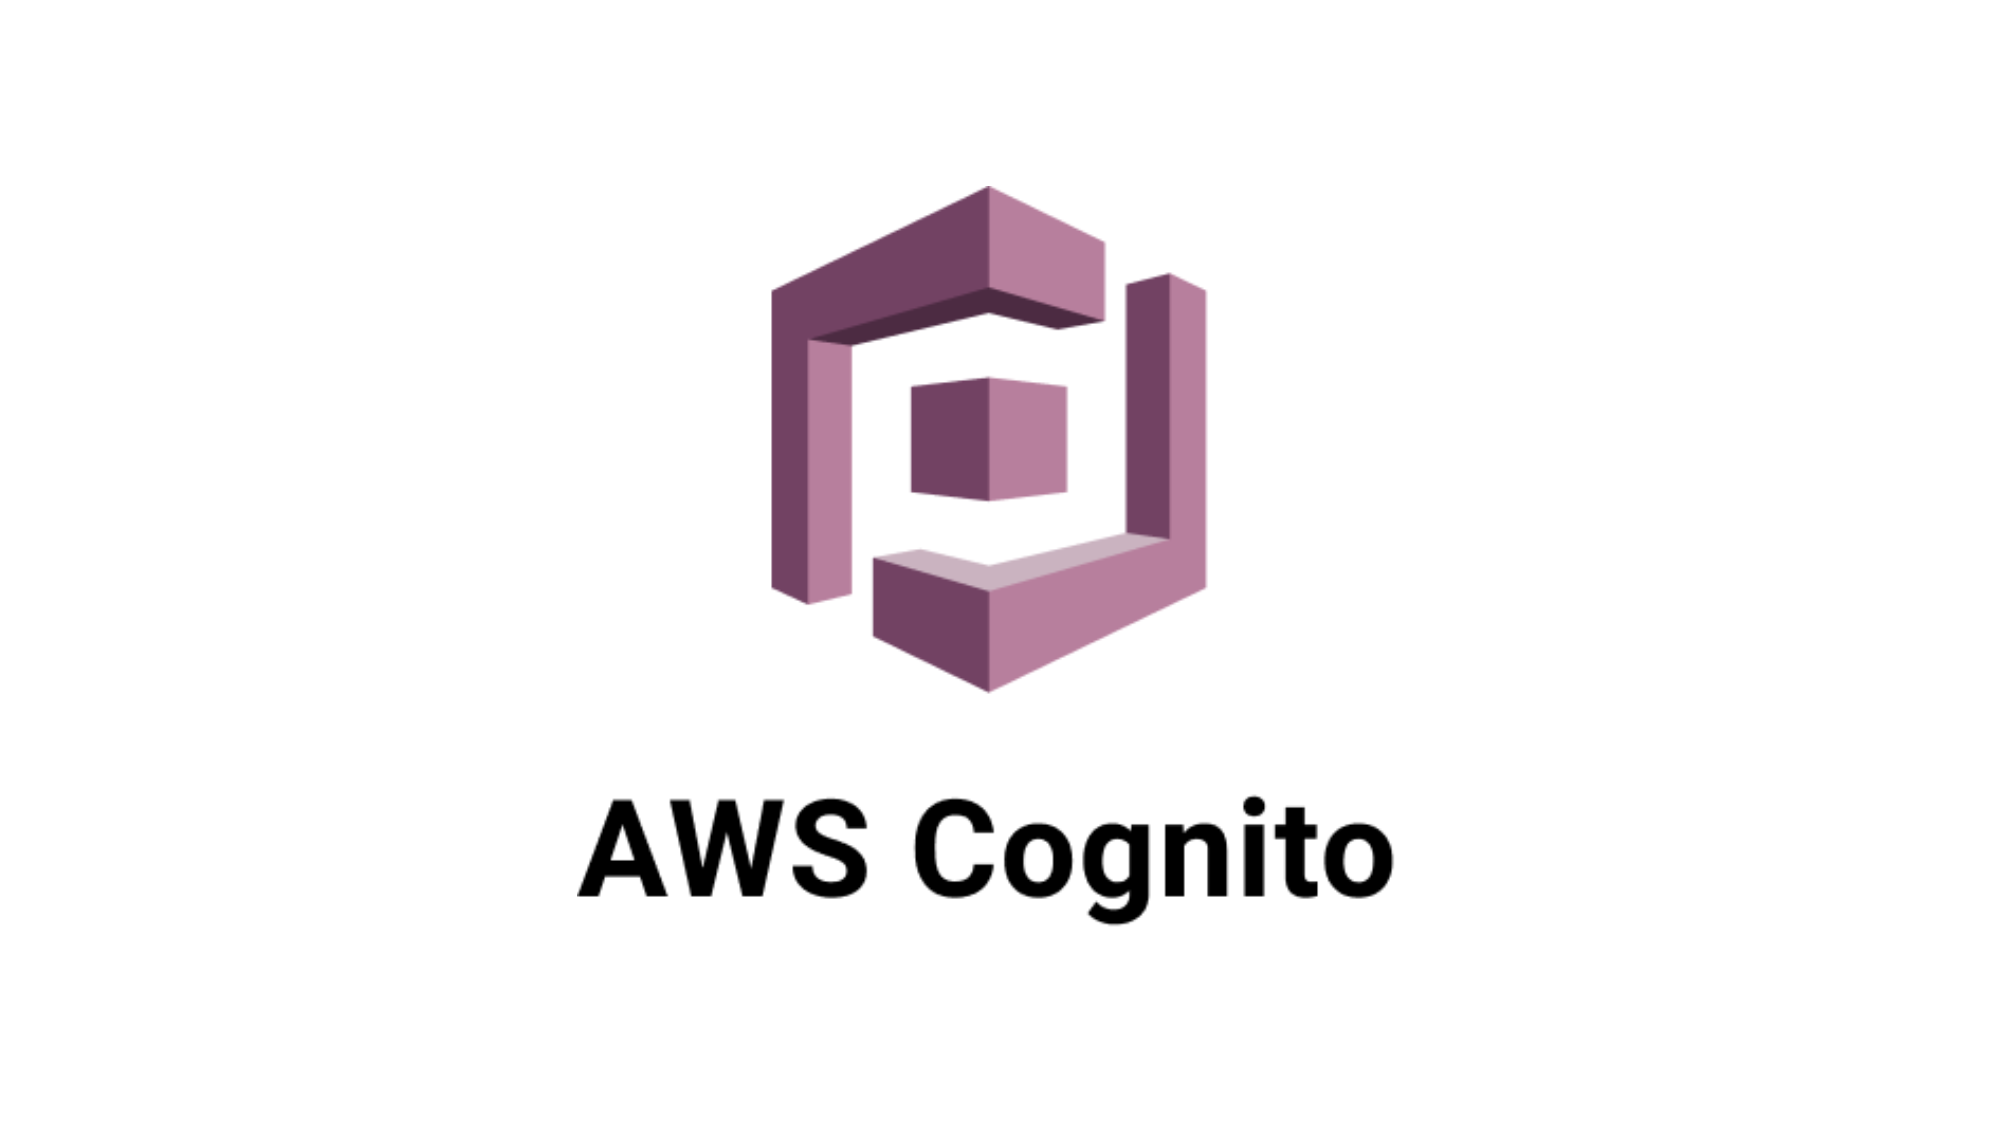 Cognito by AWS